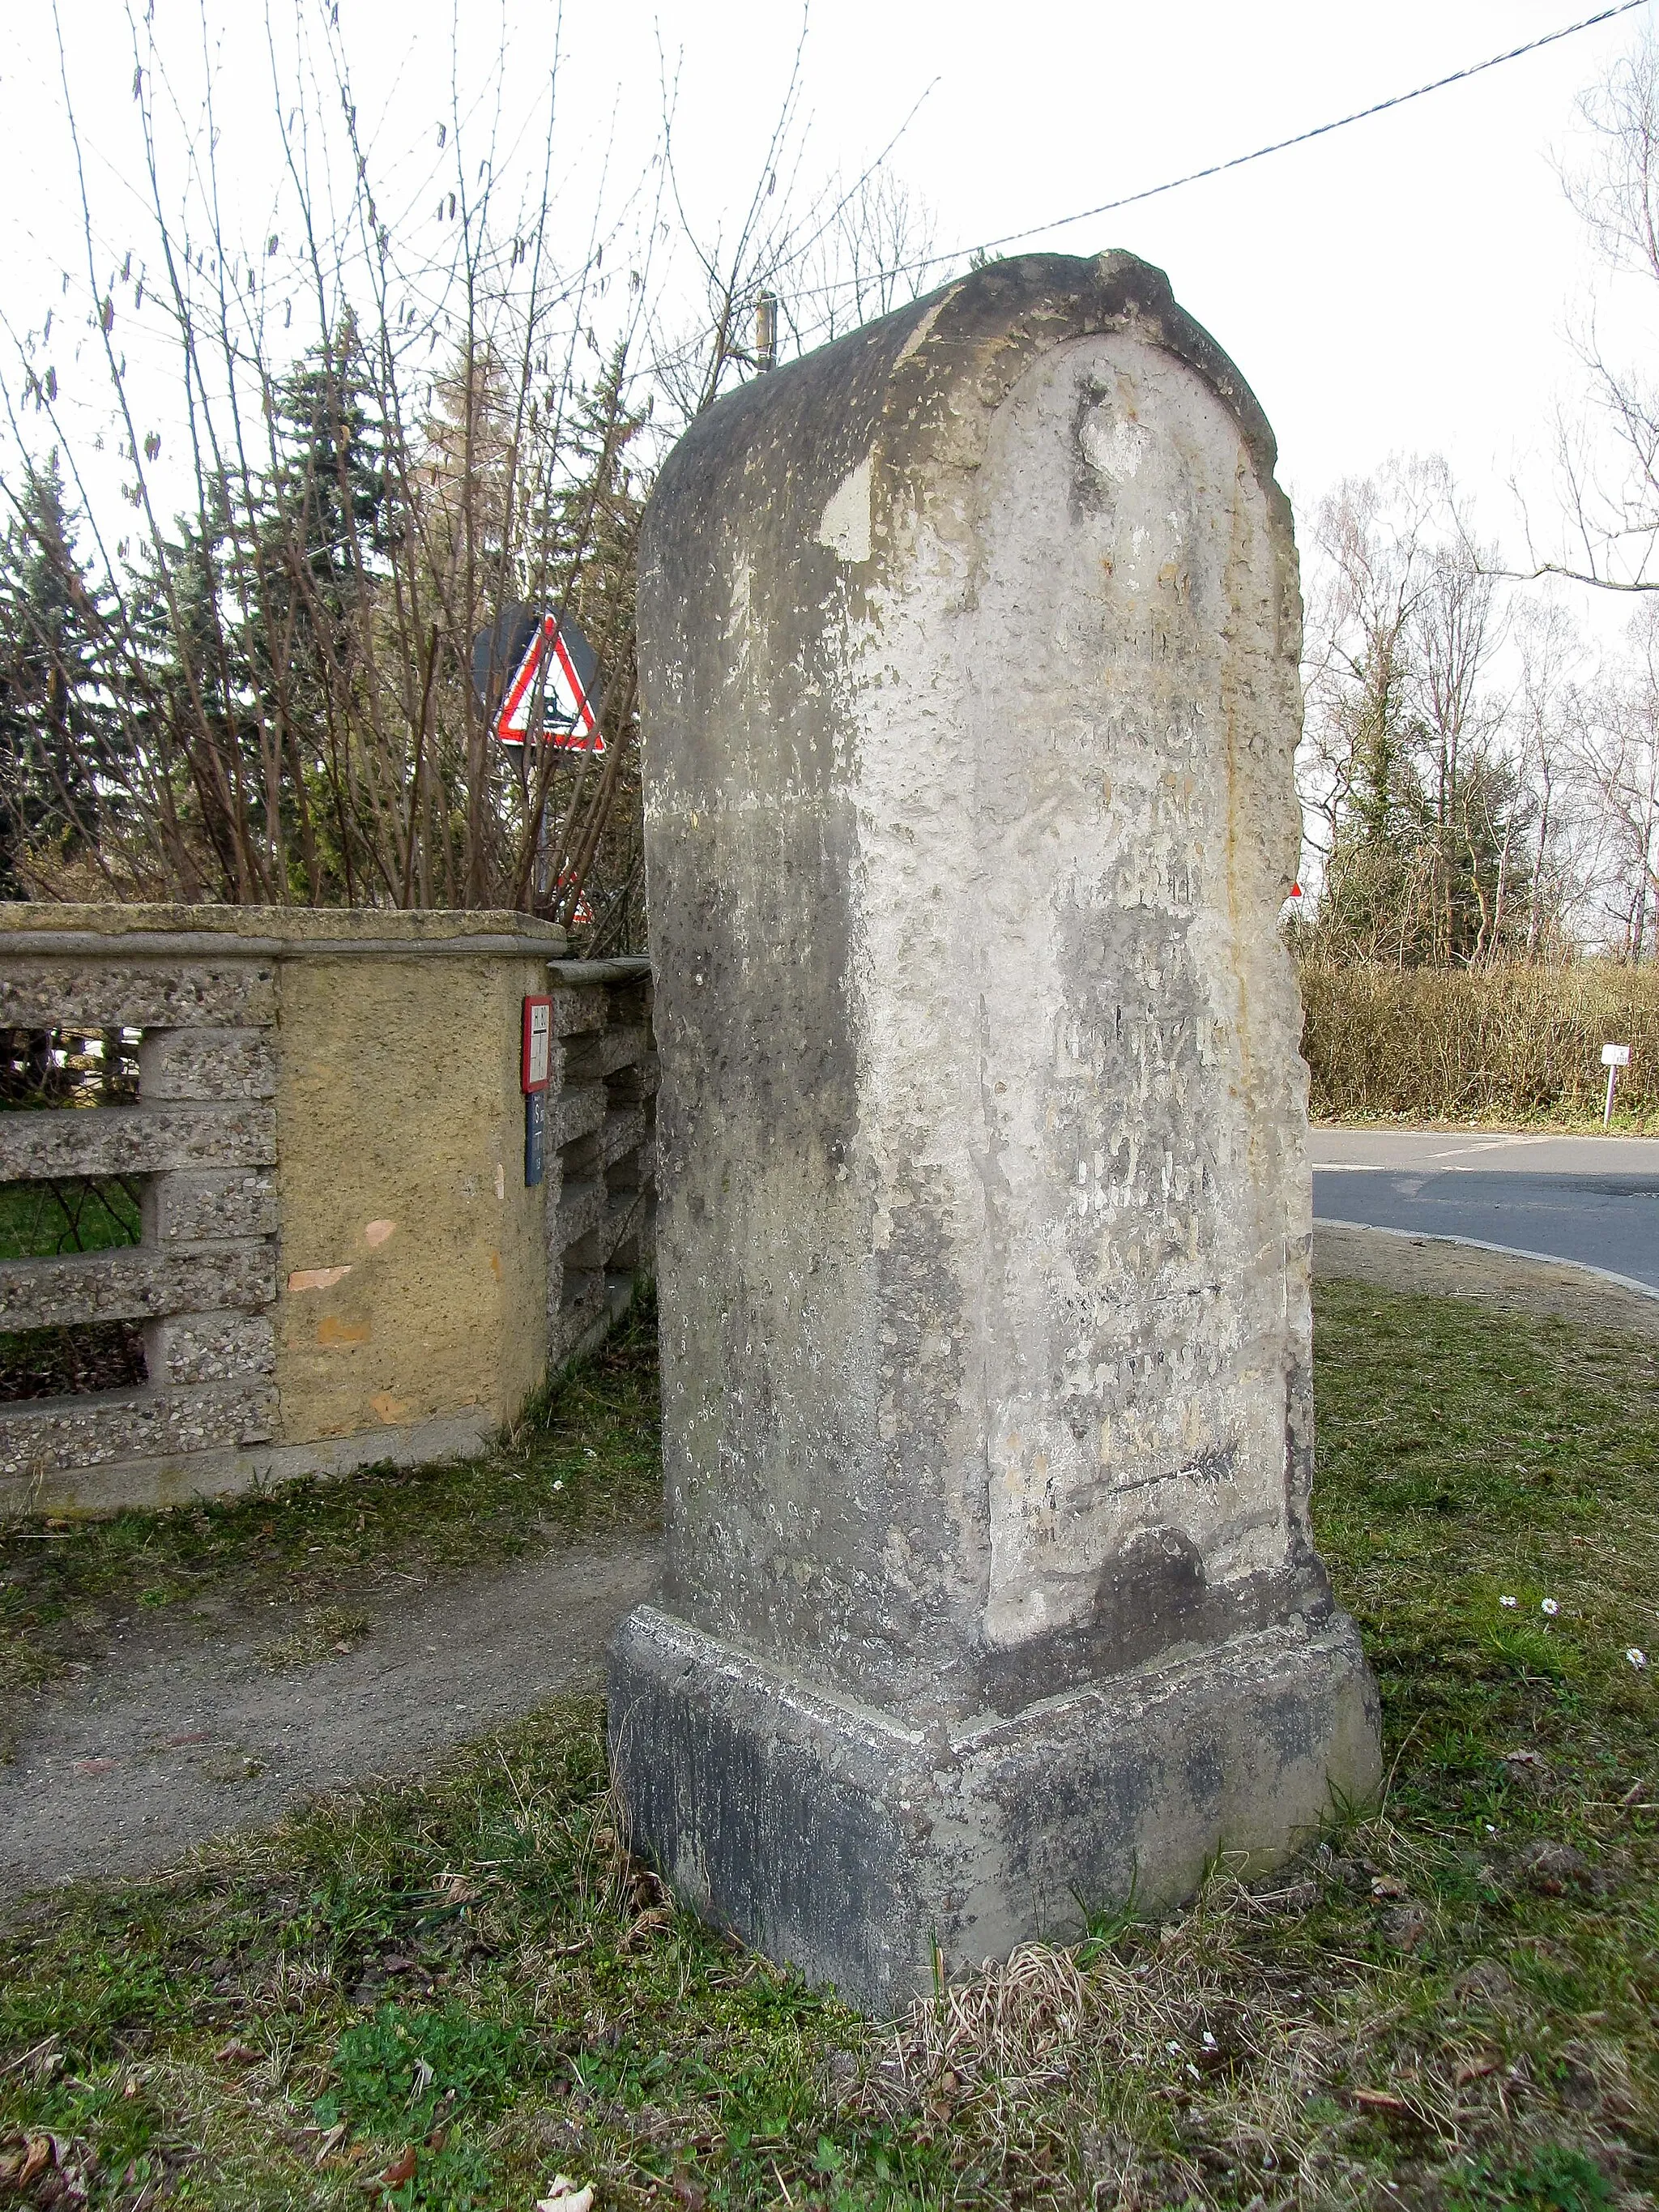 Photo showing: This media shows the protected monument of Saxony with the ID 08972196 KDSa/08972196(other).